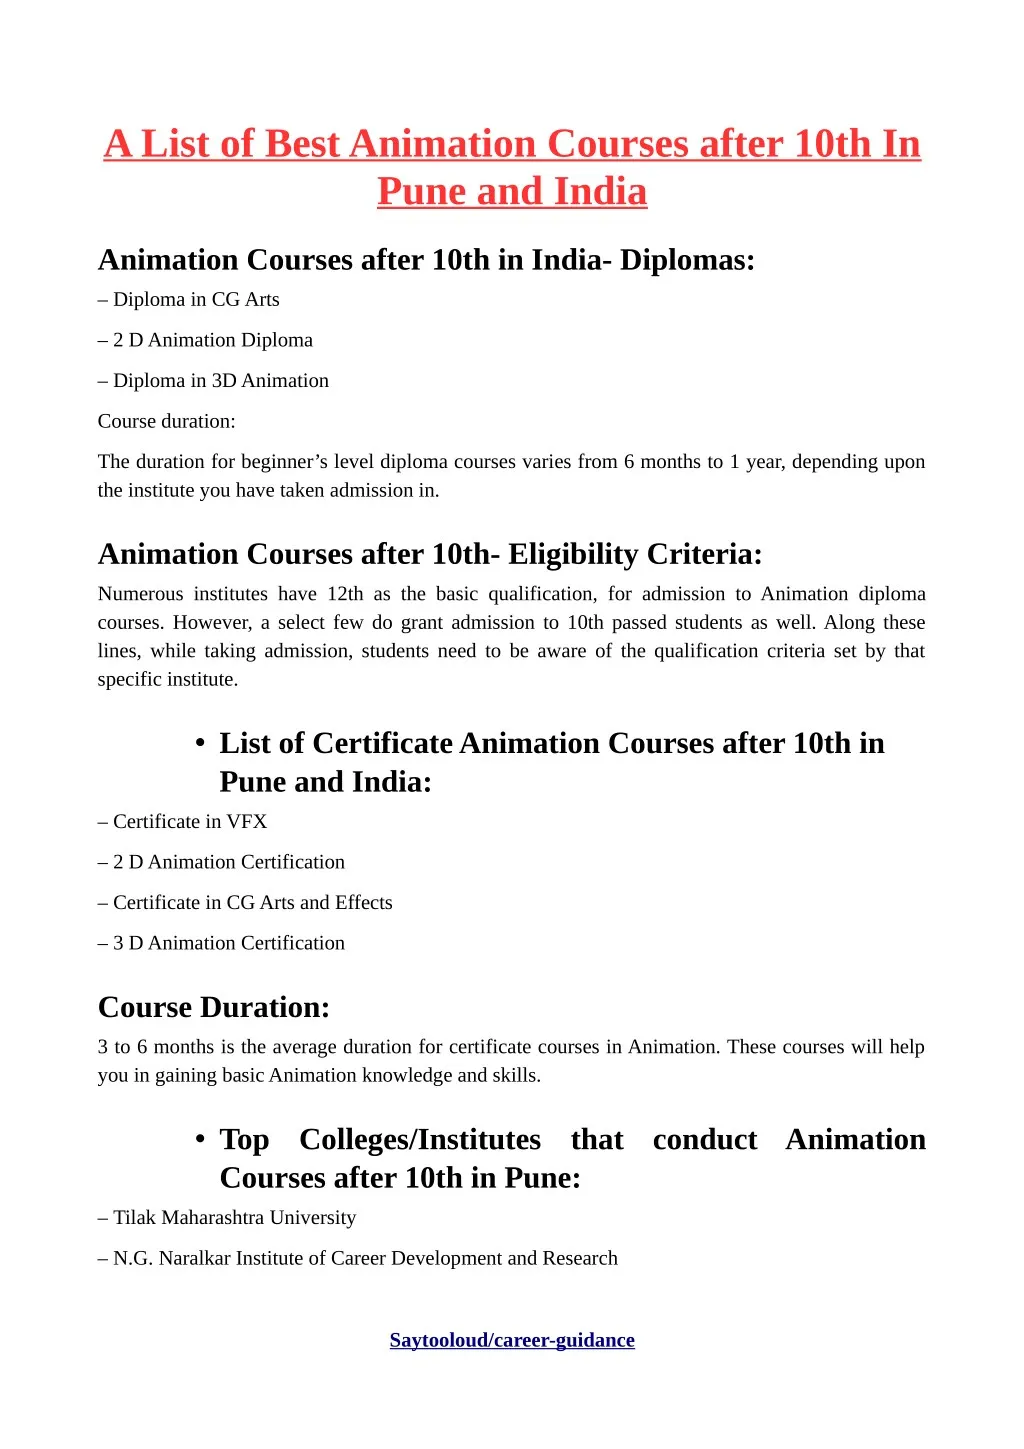 PPT - A List of Best Animation Courses after 10th In Pune and India  PowerPoint Presentation - ID:7930917